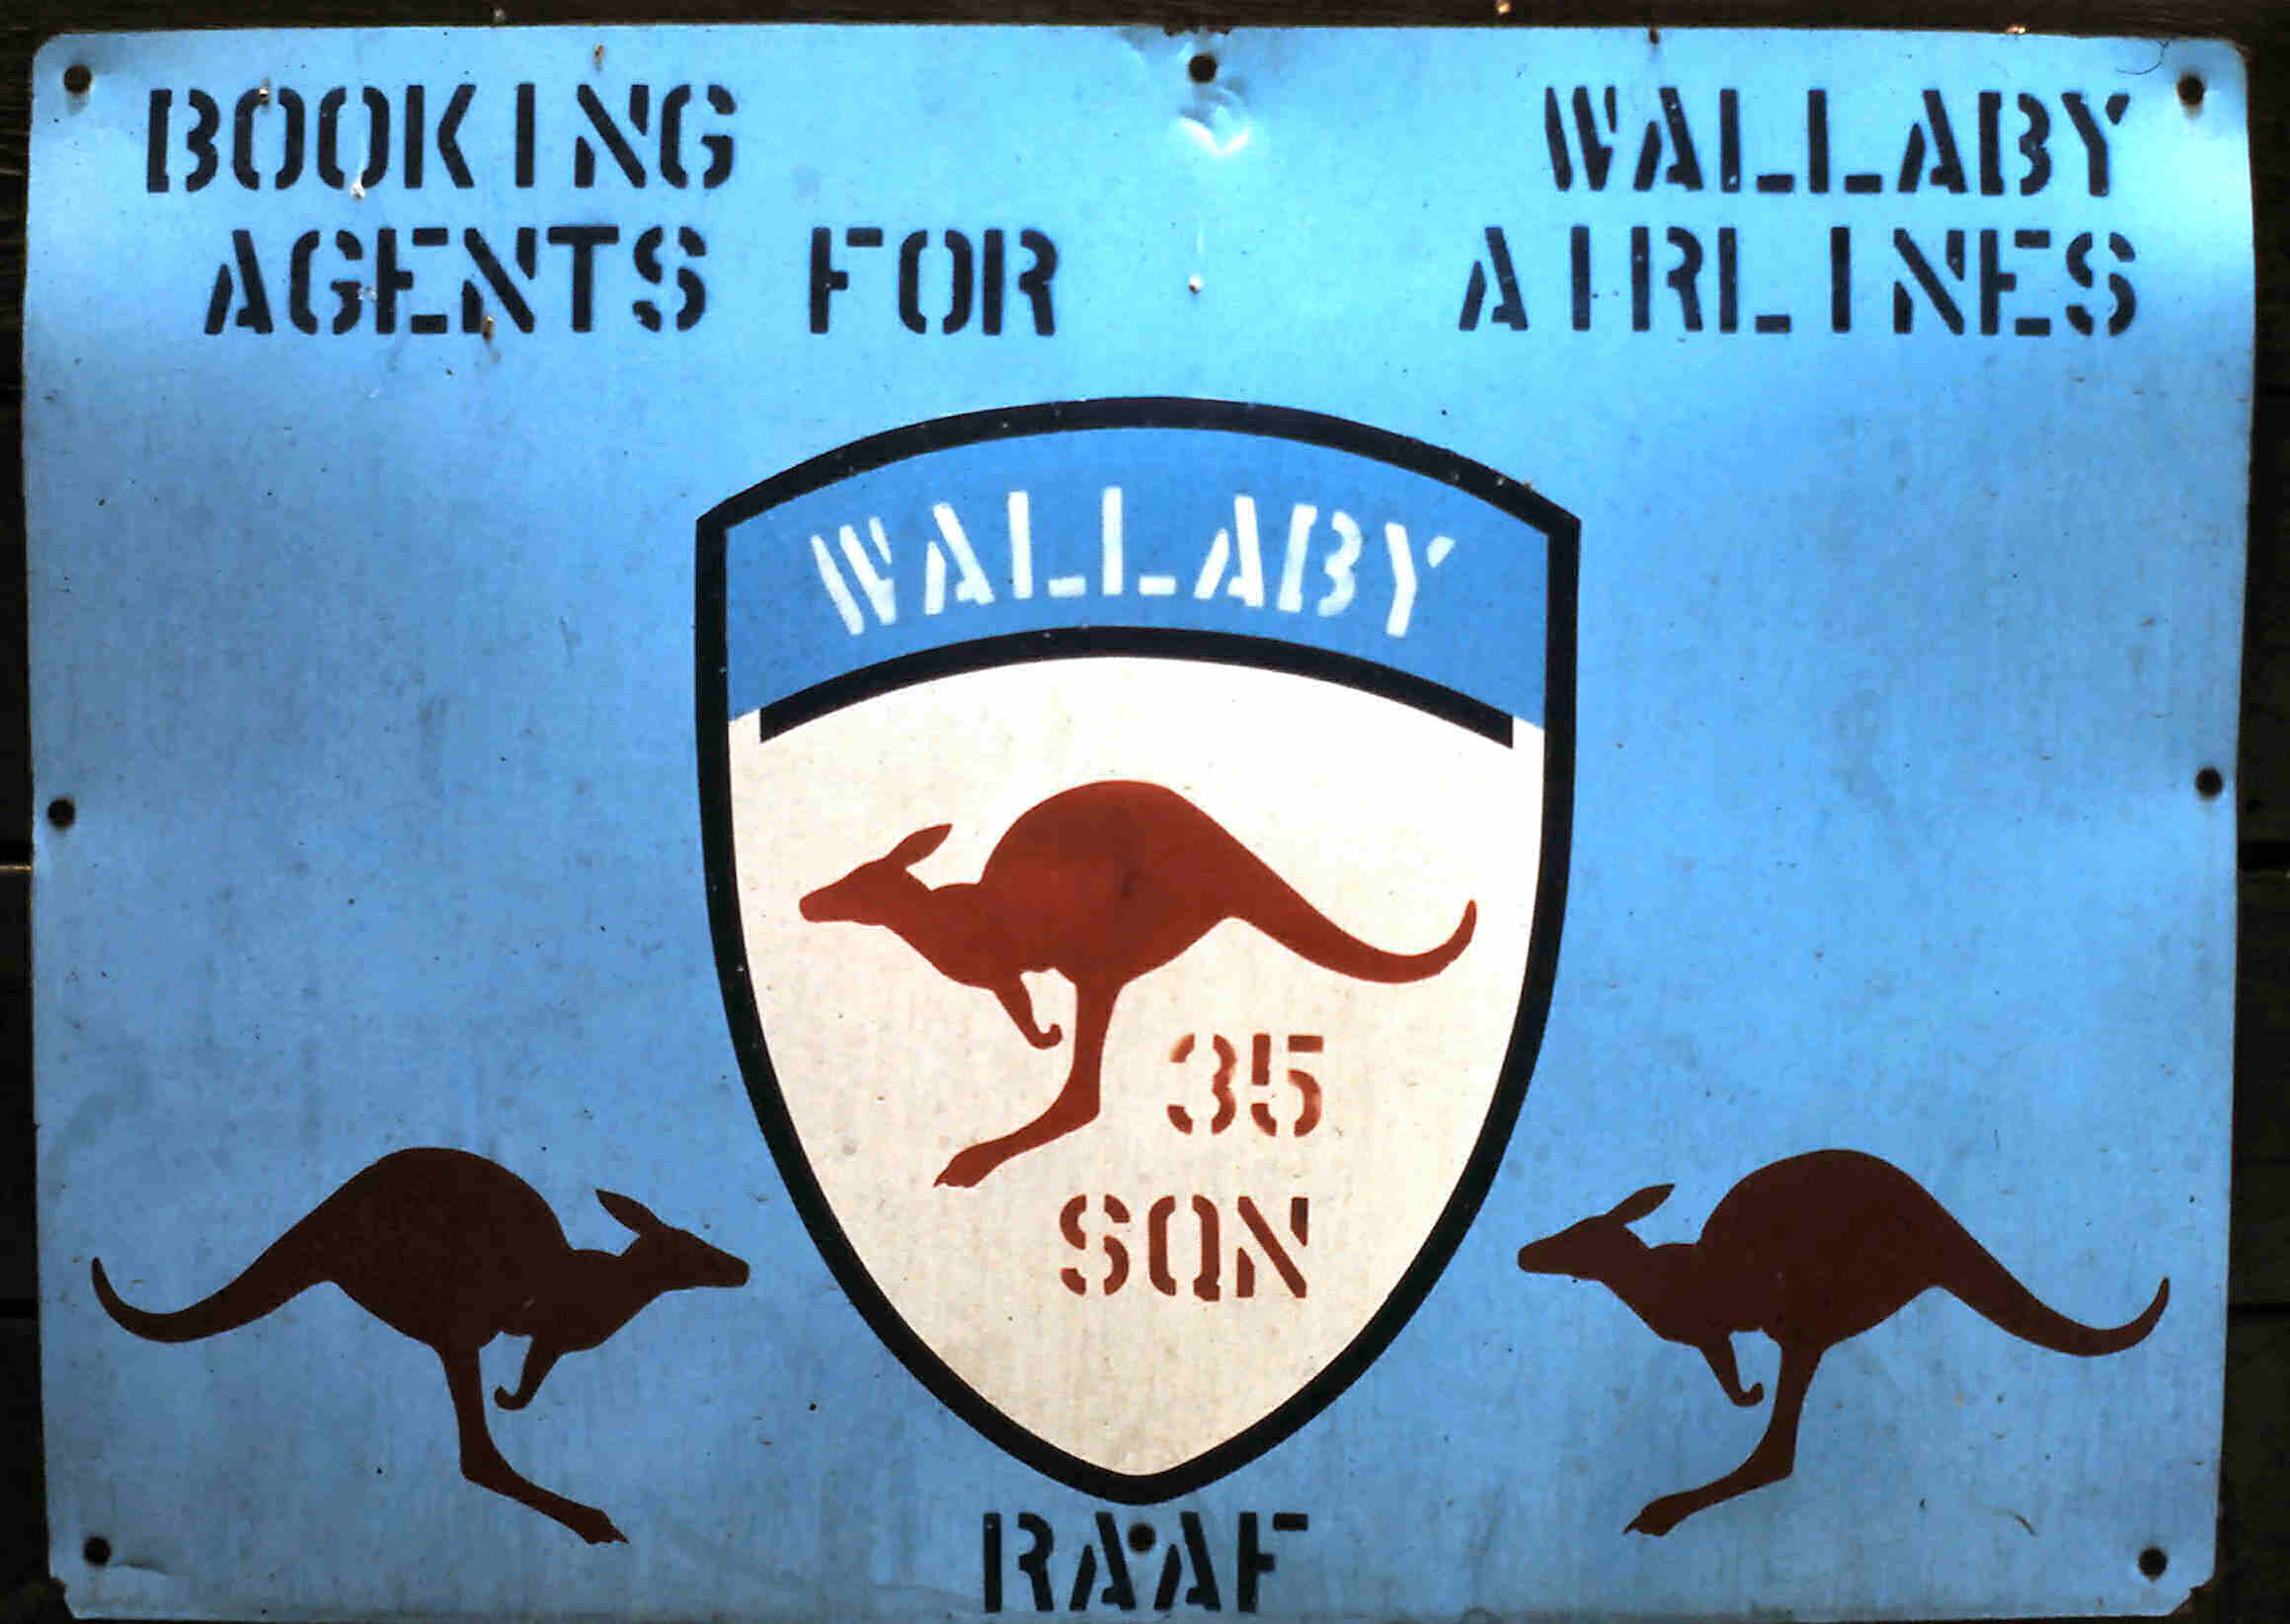 Wallaby airlines, Vung Tau